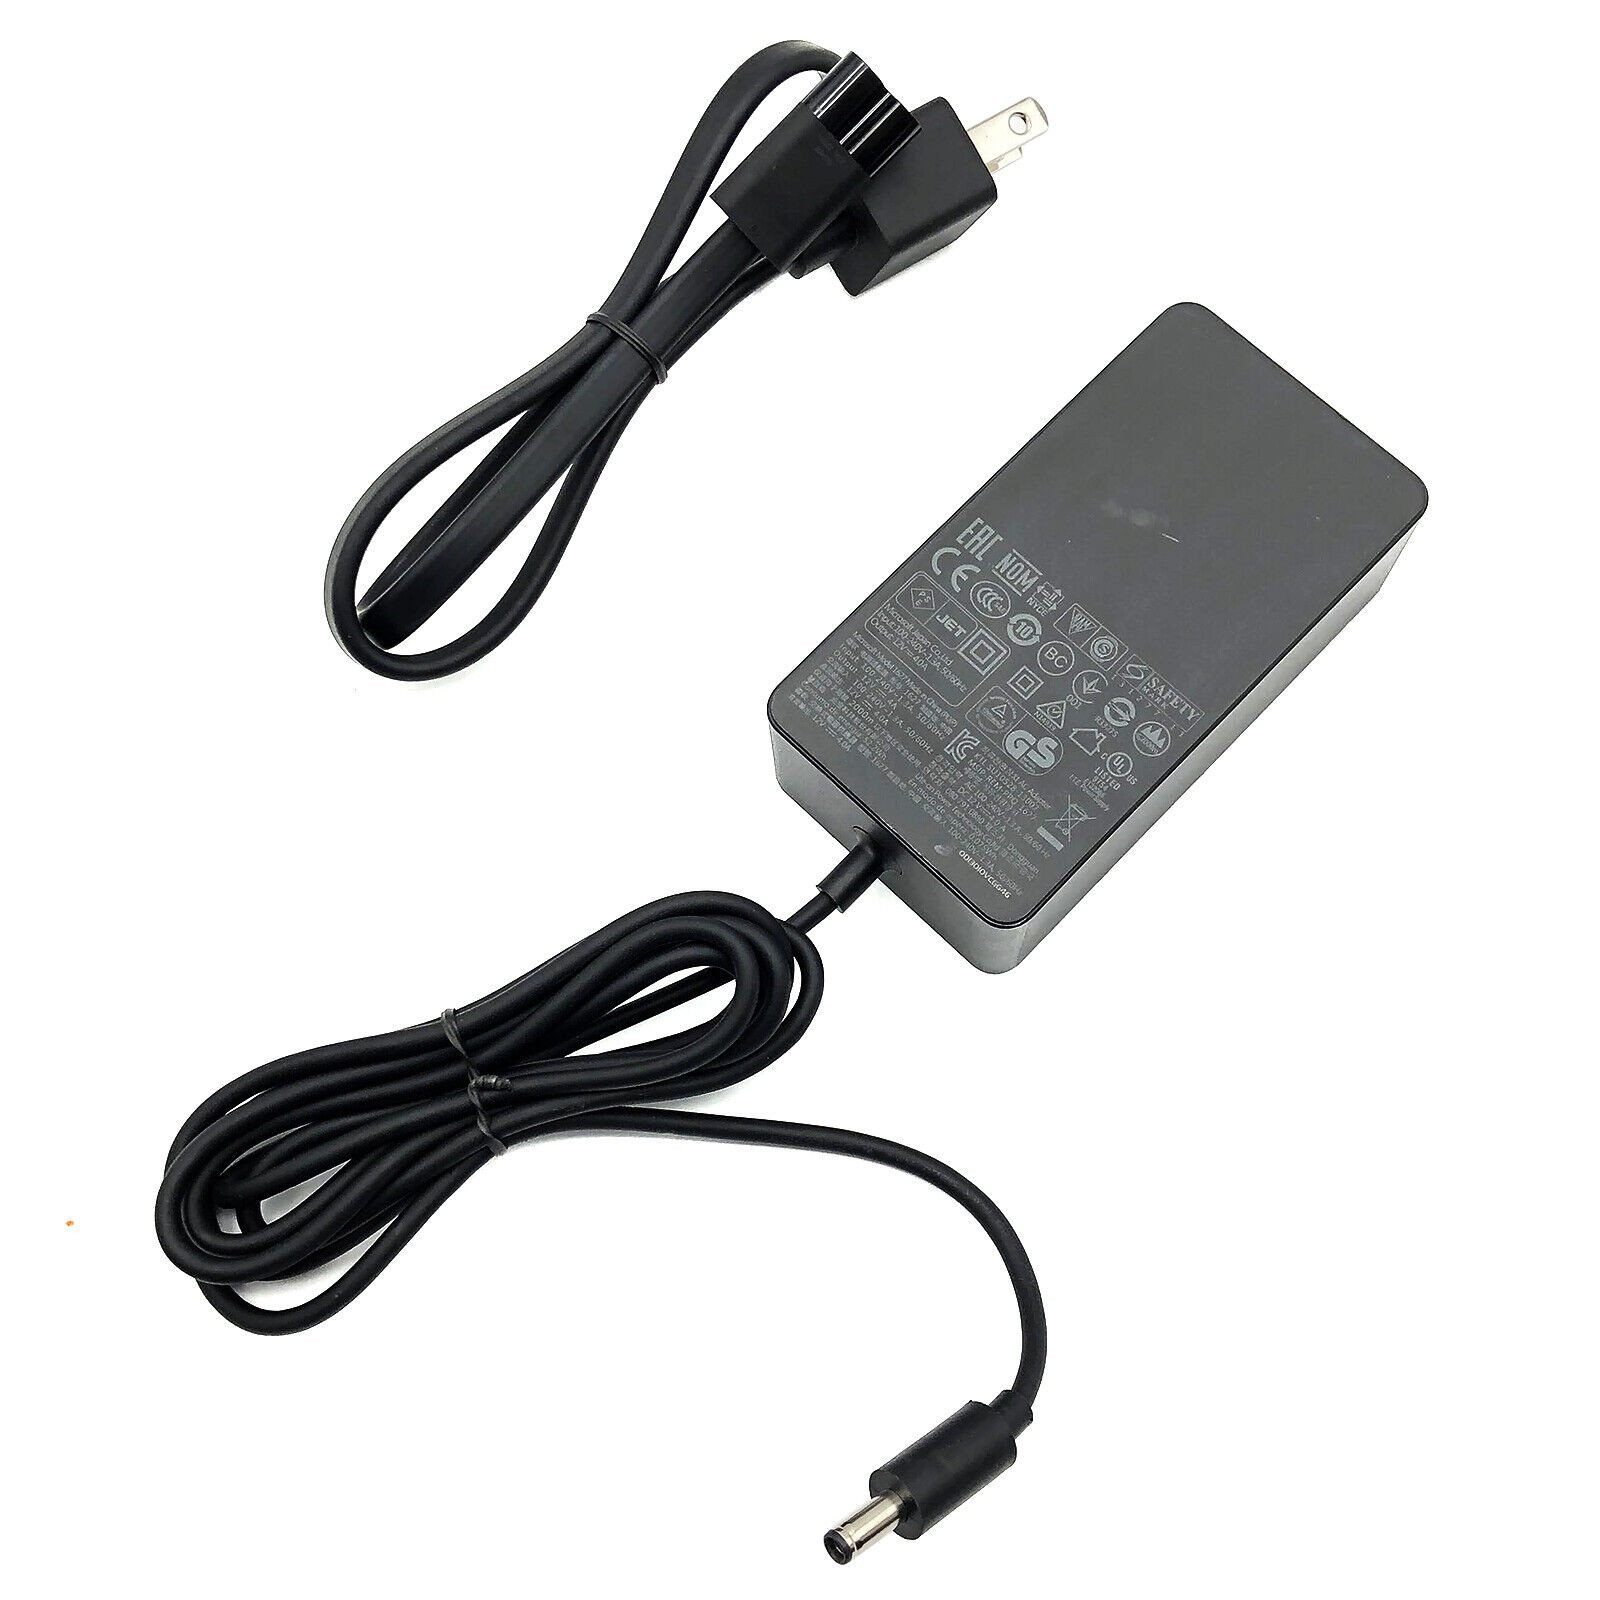 OPEN BOX Genuine Microsoft 48W Adapter for Surface Pro 3 Dock Station Model 1664